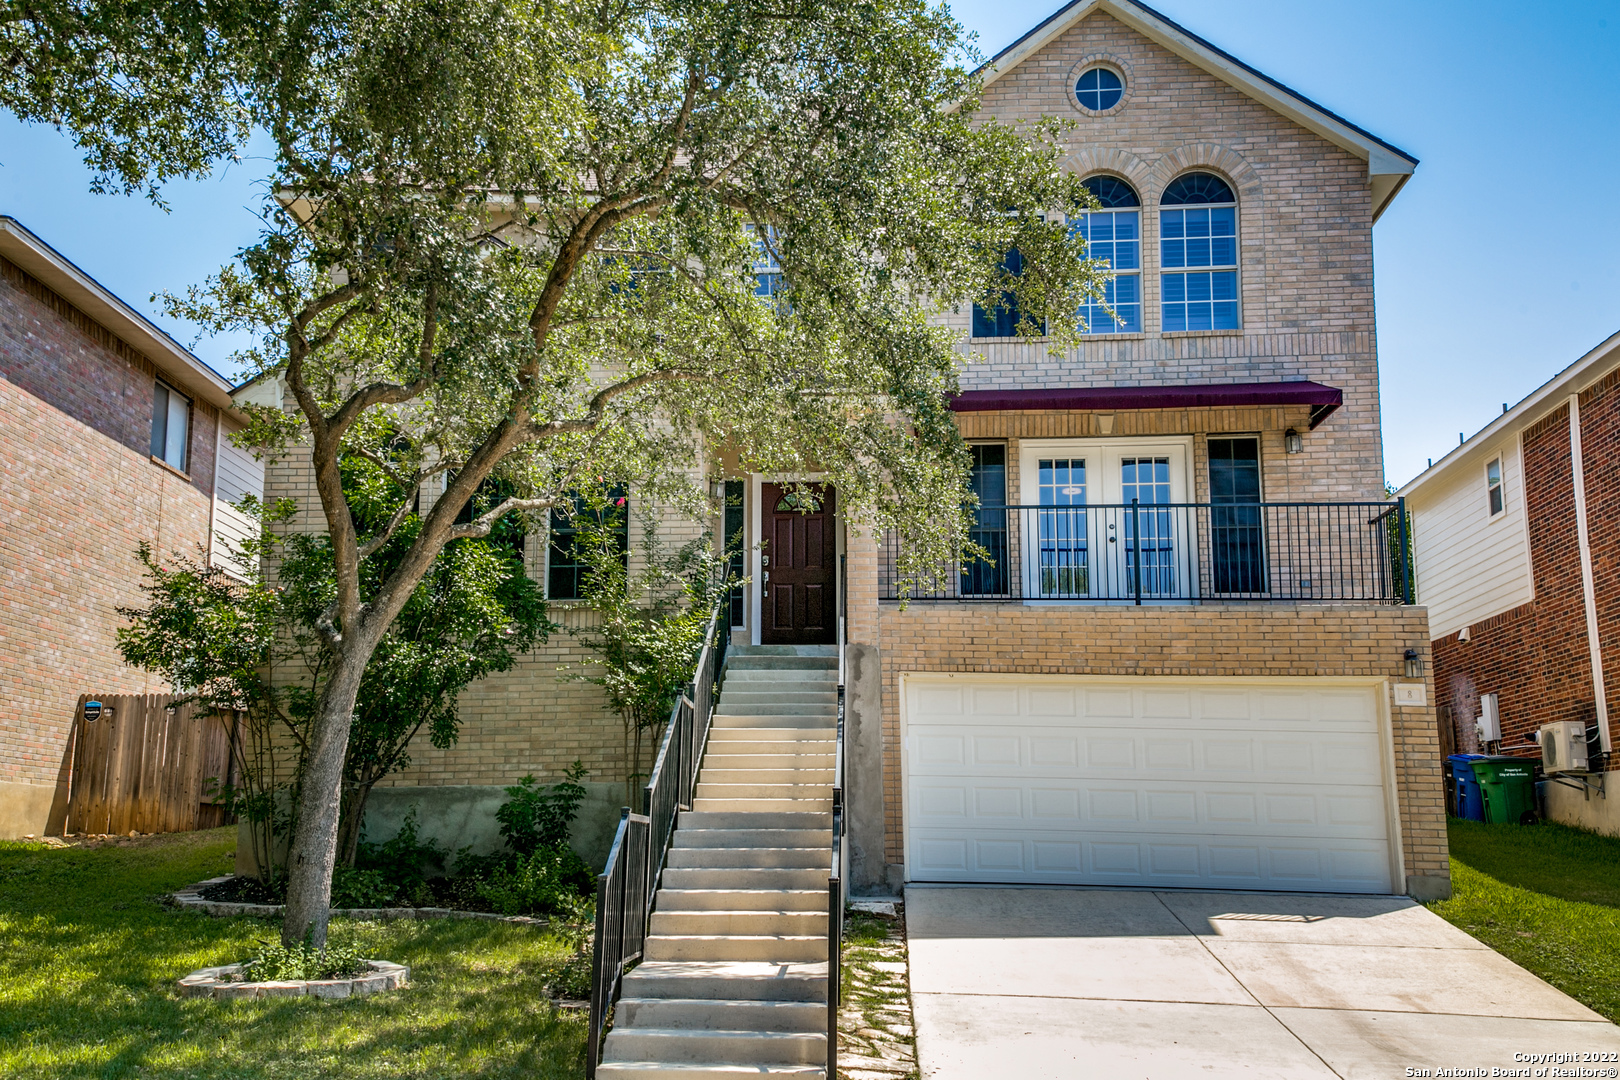 *PRIME LOCATION!* Well built two story home in the gated community of Rosewood Gardens located in the heart of San Antonio with *5 bedrooms* master bedroom downstairs, 3 full baths and one half bath for your guests. Lots of upgrades! *Roof replaced in 2020, new water heaters in 2021, carpet replaced in 2019, window shutters in various places, solid wood stair trends and risers, new solid wood floor in dining/living area, luxury vinyl plank in upstairs living room, hallway and bathrooms, stone tile in living room, downstairs bathroom and entryways, solar screens on most windows and new awning above french doors.* Spacious backyard with a covered patio and an extended patio slab for all of your entertaining needs. In a cul-de-sac so no through traffic, walking distance to Huebner Elementary and close distance to 1604, 410, shopping and dining. Schedule your showing today! *OPEN HOUSE SATURDAY JULY 9TH FROM 1:00-4:00 PM*